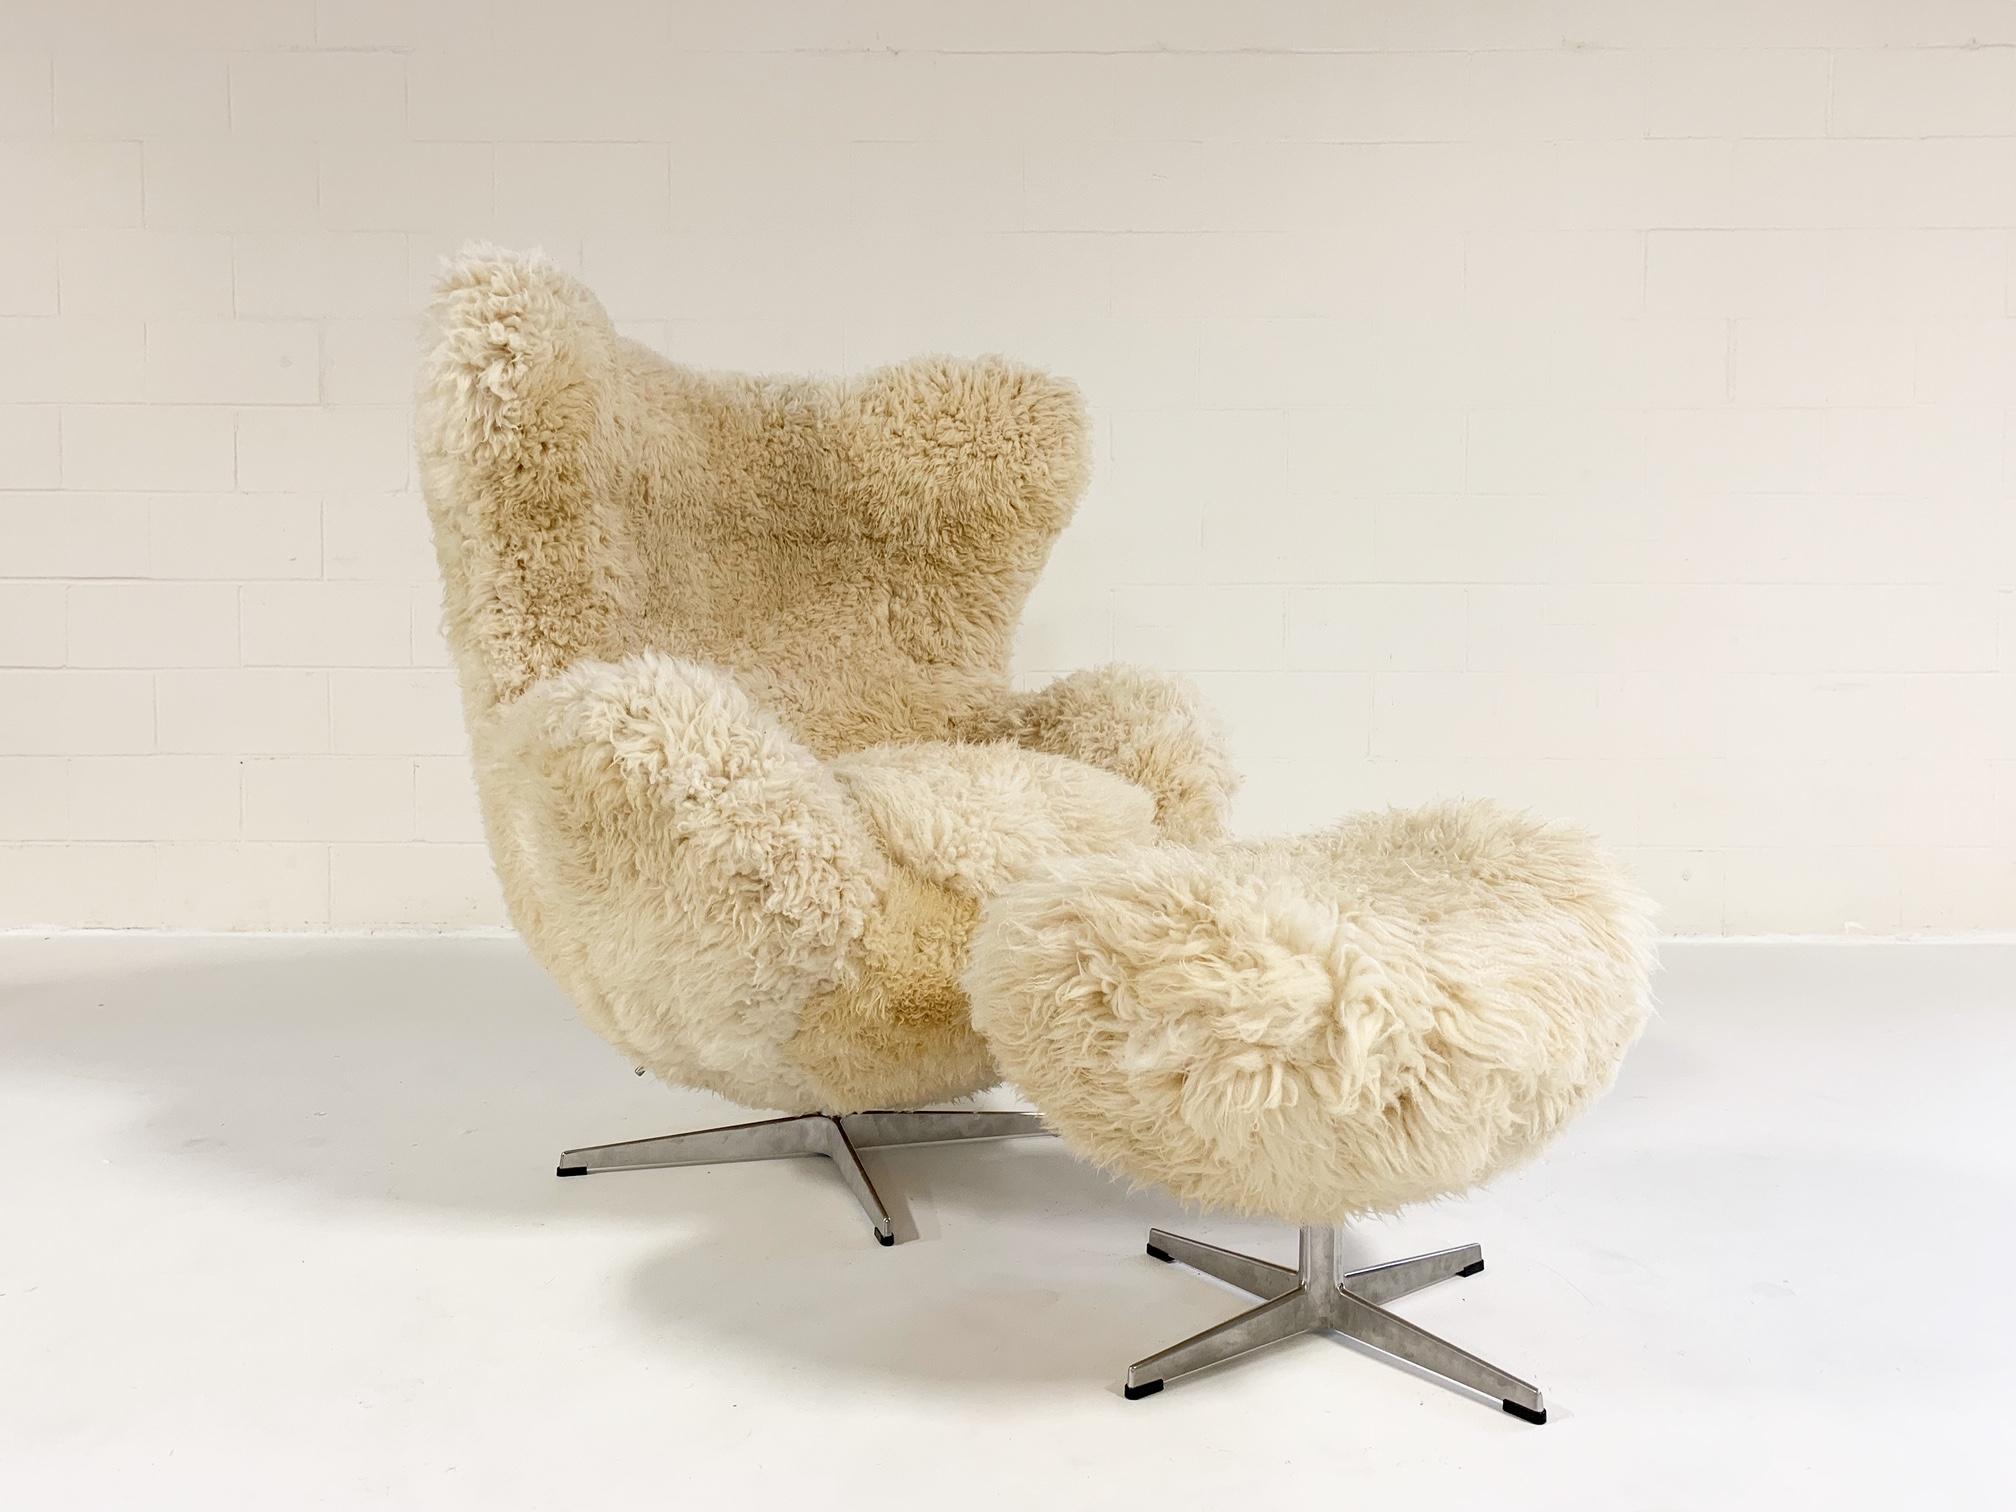 Ask any lover of midcentury furniture to name the top 5 iconic chairs of mcm design and we guarantee the Egg chair would be on that list. The Forsyth design team was over the moon when we collected the amazing, original Arne Jacobsen Egg chair.